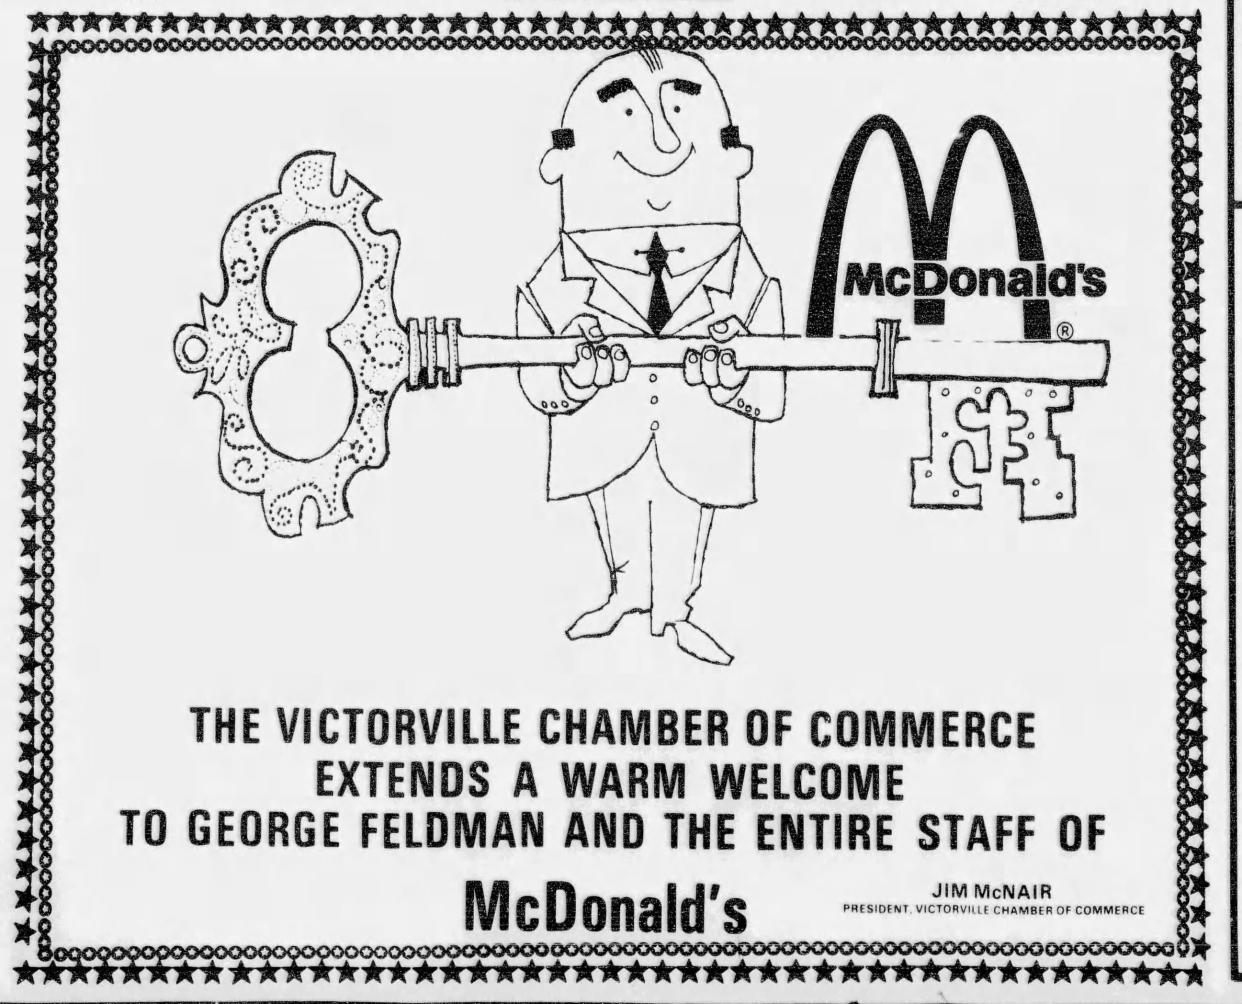 In 1973, nearly 7,700 excited residents showed up to the grand opening of the High Desert’s first McDonald’s located on Seventh Street in Victorville.